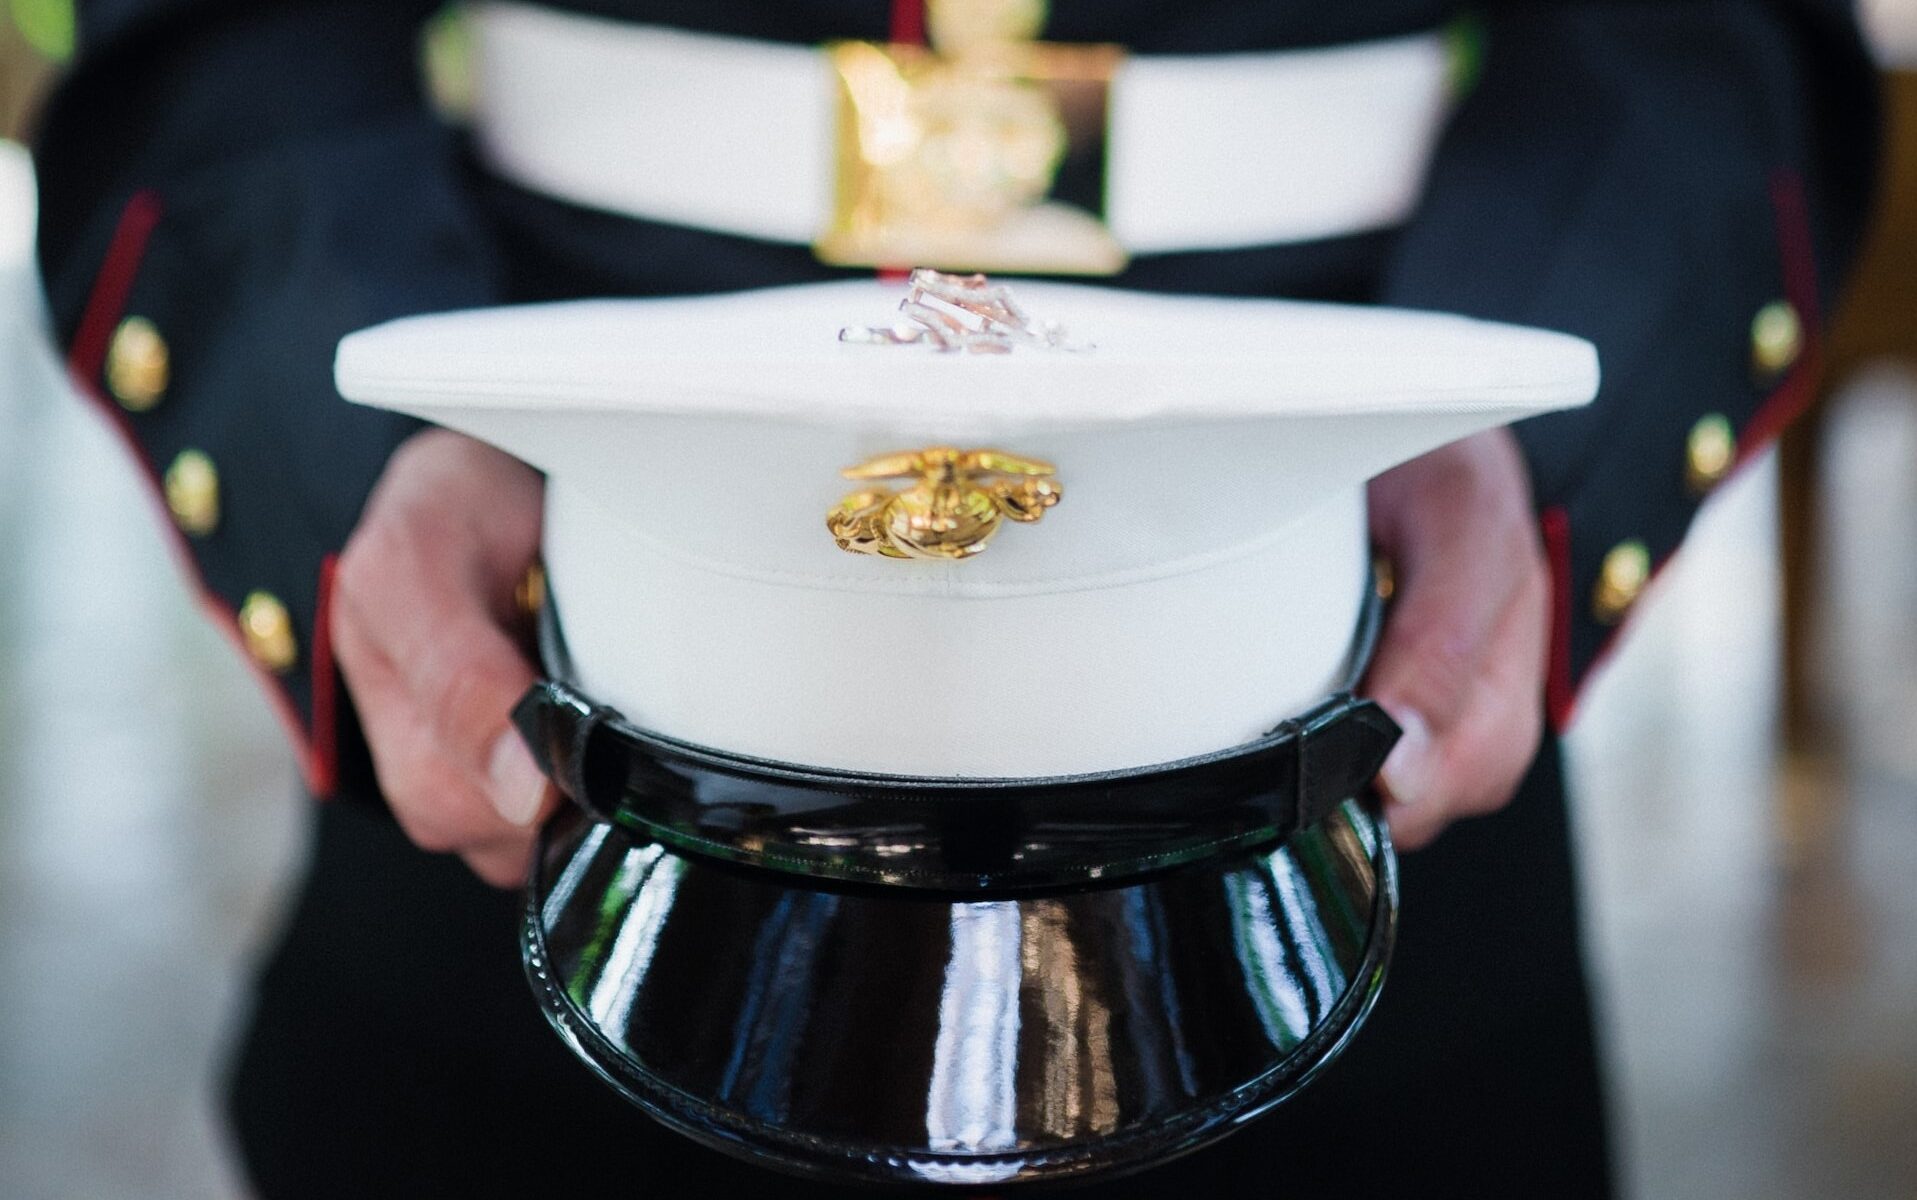 Marine Corps service member holding hat